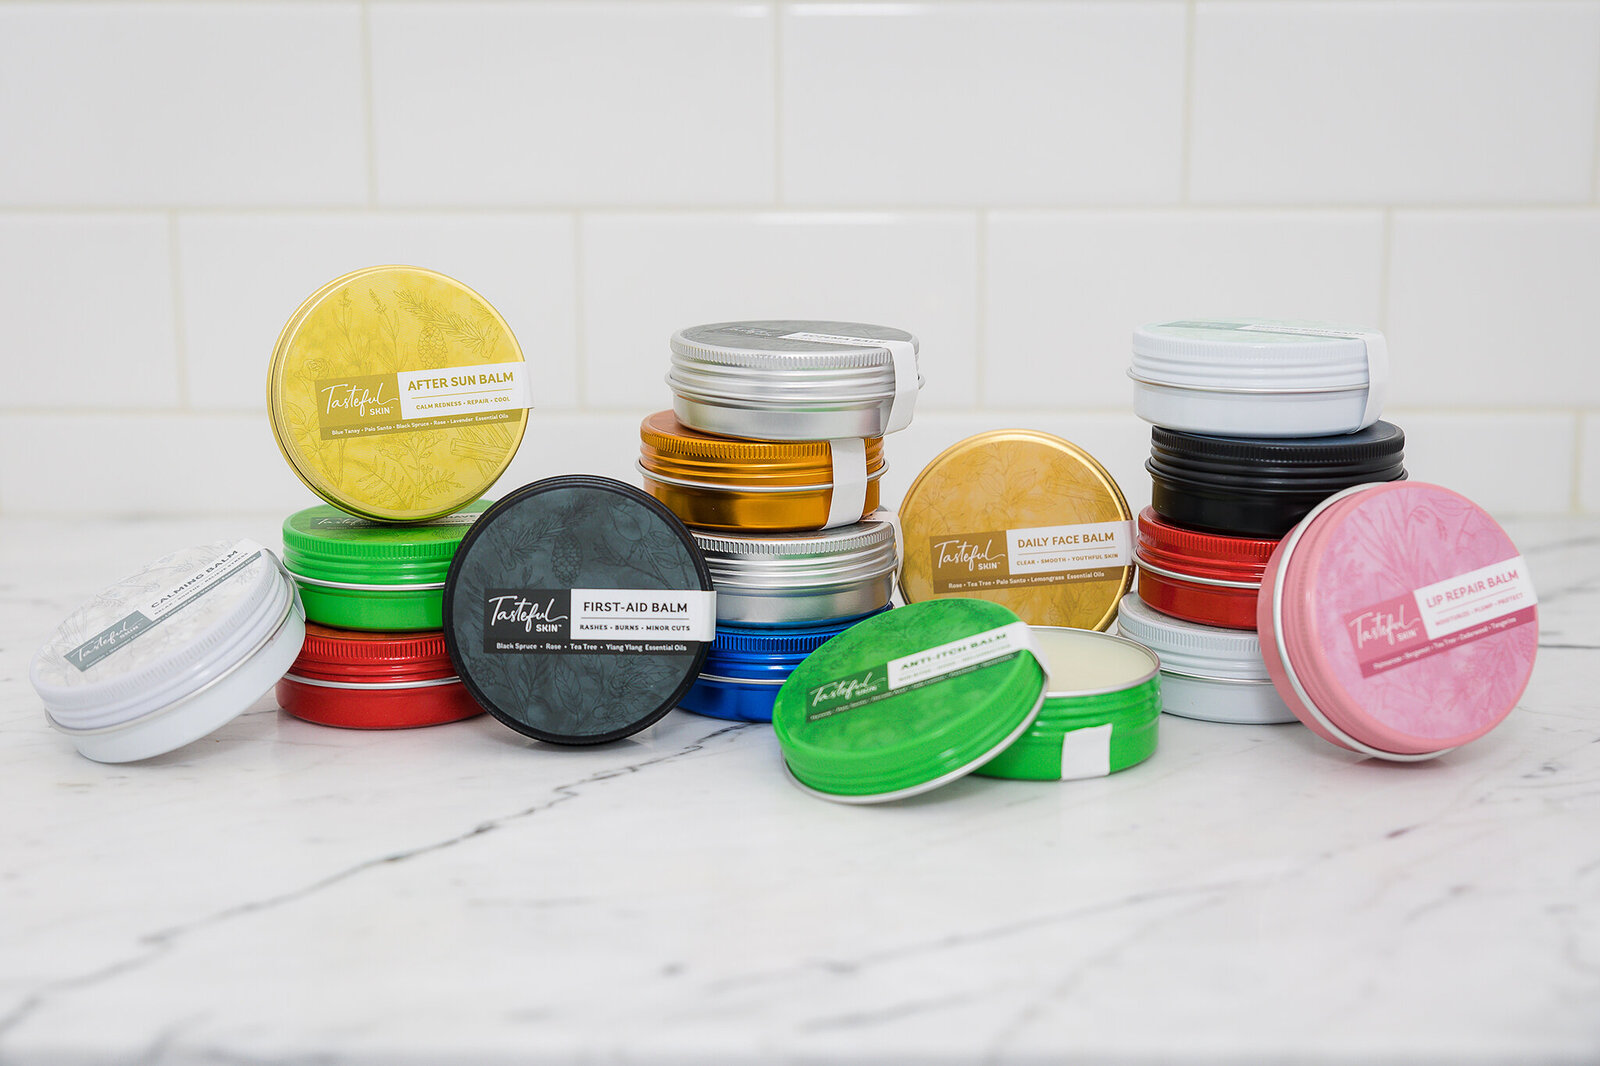 styled beauty products in colorful tins